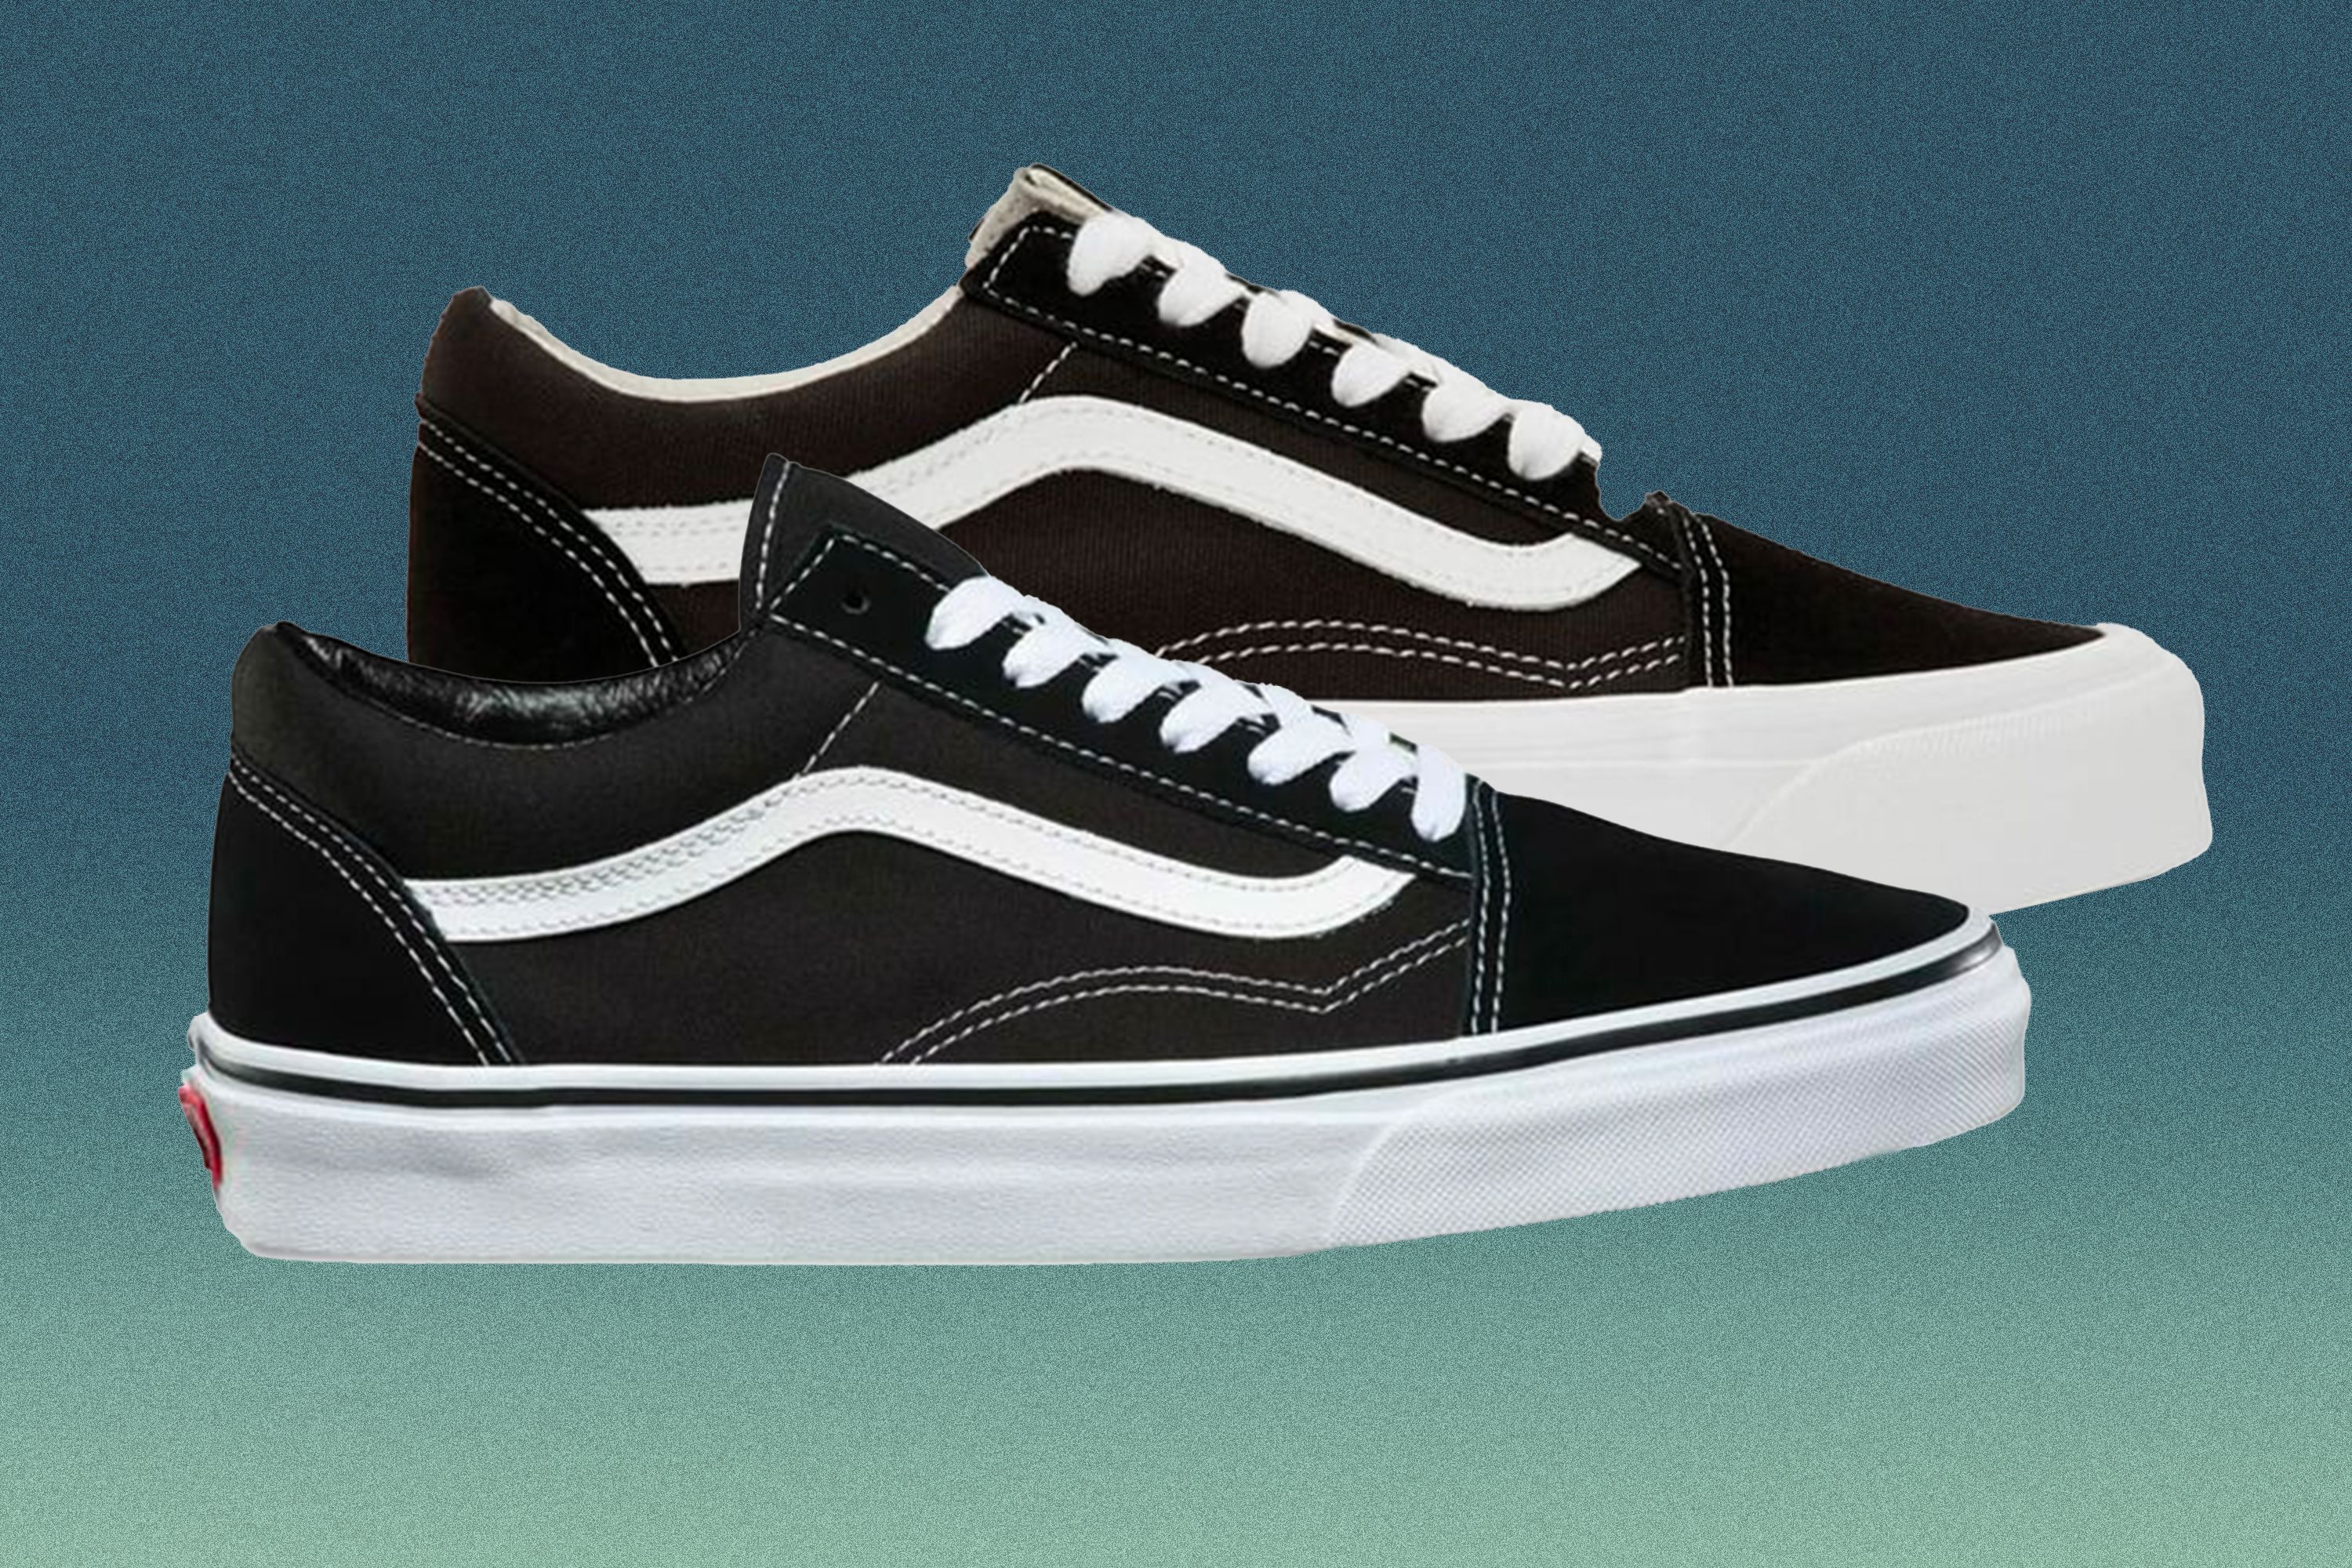 Kviksølv Tranquility job Why Are Vault by Vans Sneakers More Expensive Than Vans Classics?